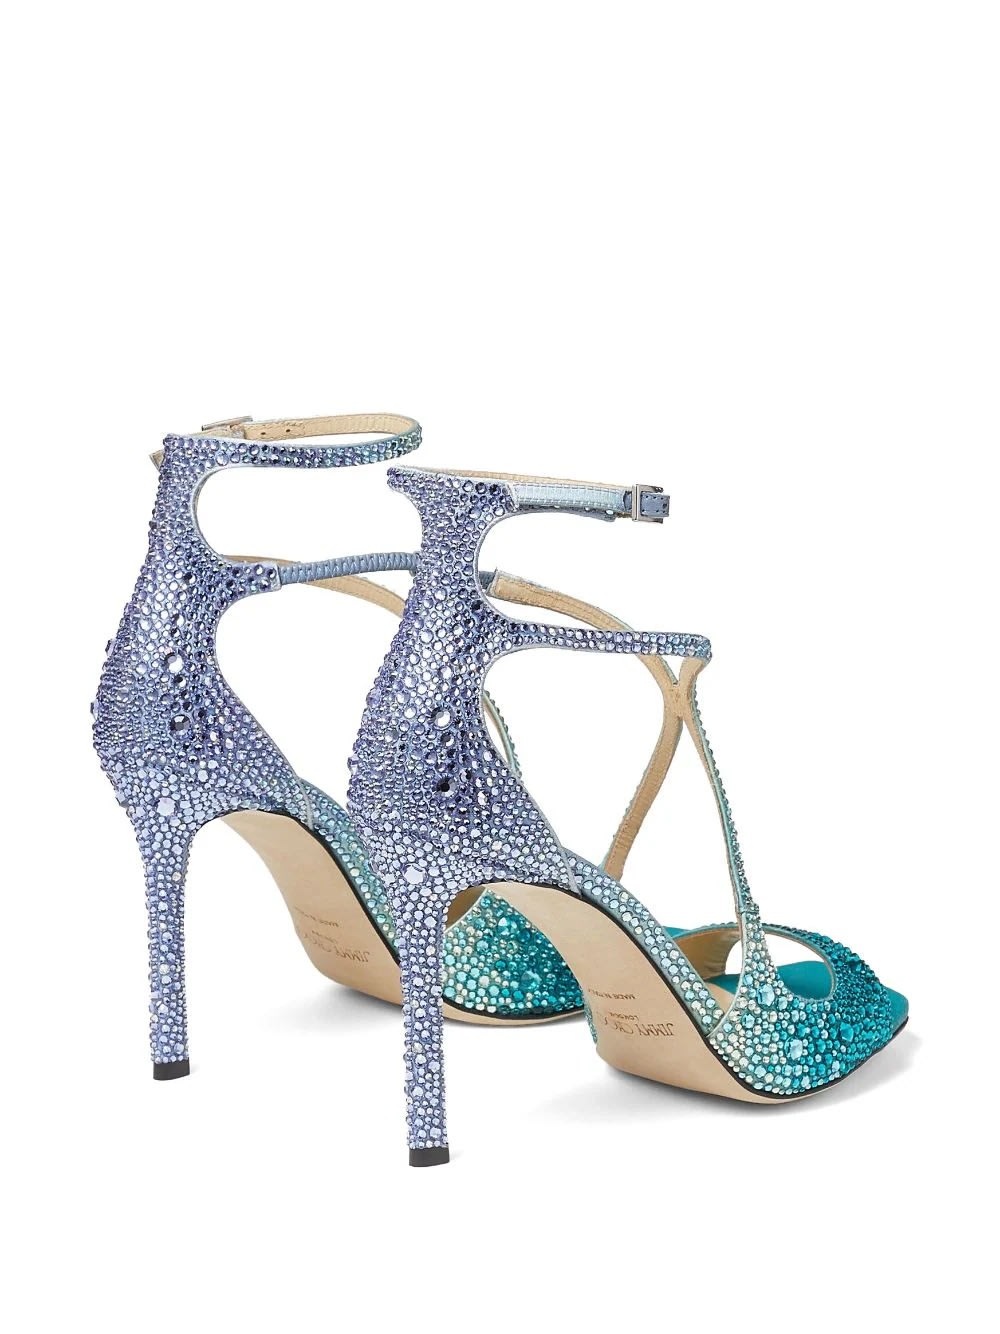 Shop Jimmy Choo Azia 95 Sandal In Blue Peacock With Crystals